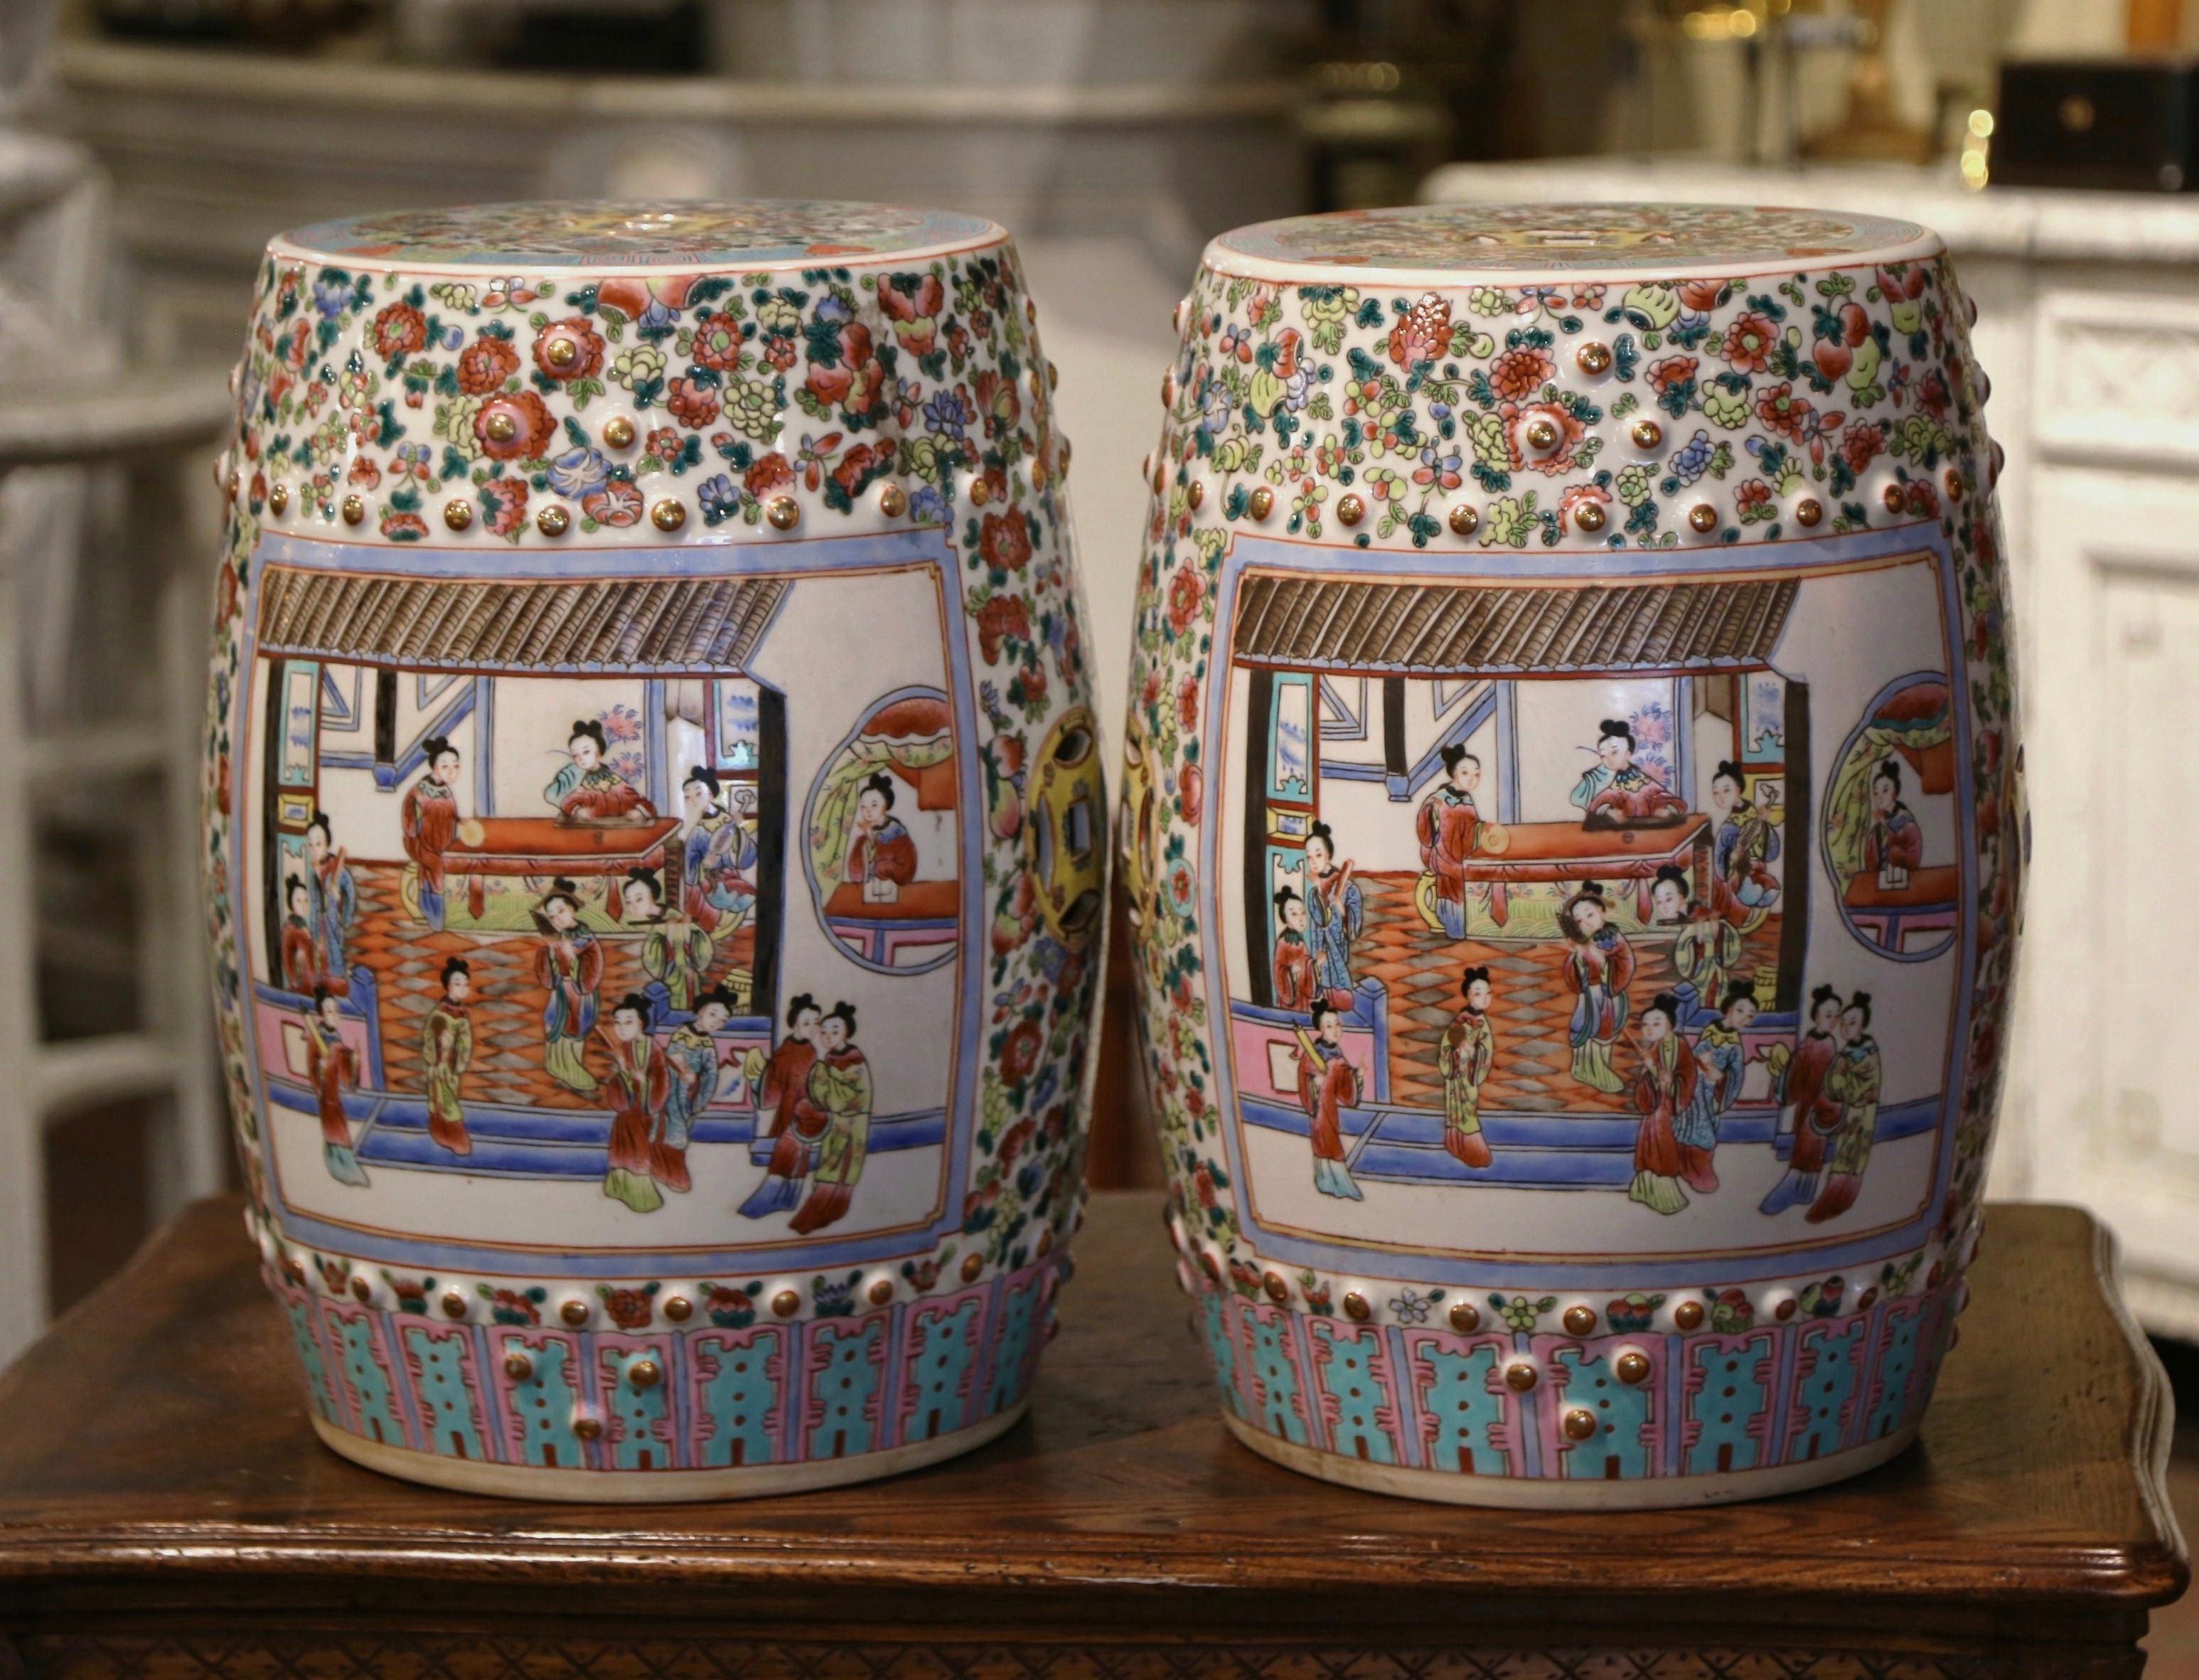 Decorate a den or a living room with this pair of colorful polychrome garden stools. Created in China, circa 1960 and round in shape, the porcelain seats are pierced on the top and around the perimeter for an intricate, sculptural effect. They are